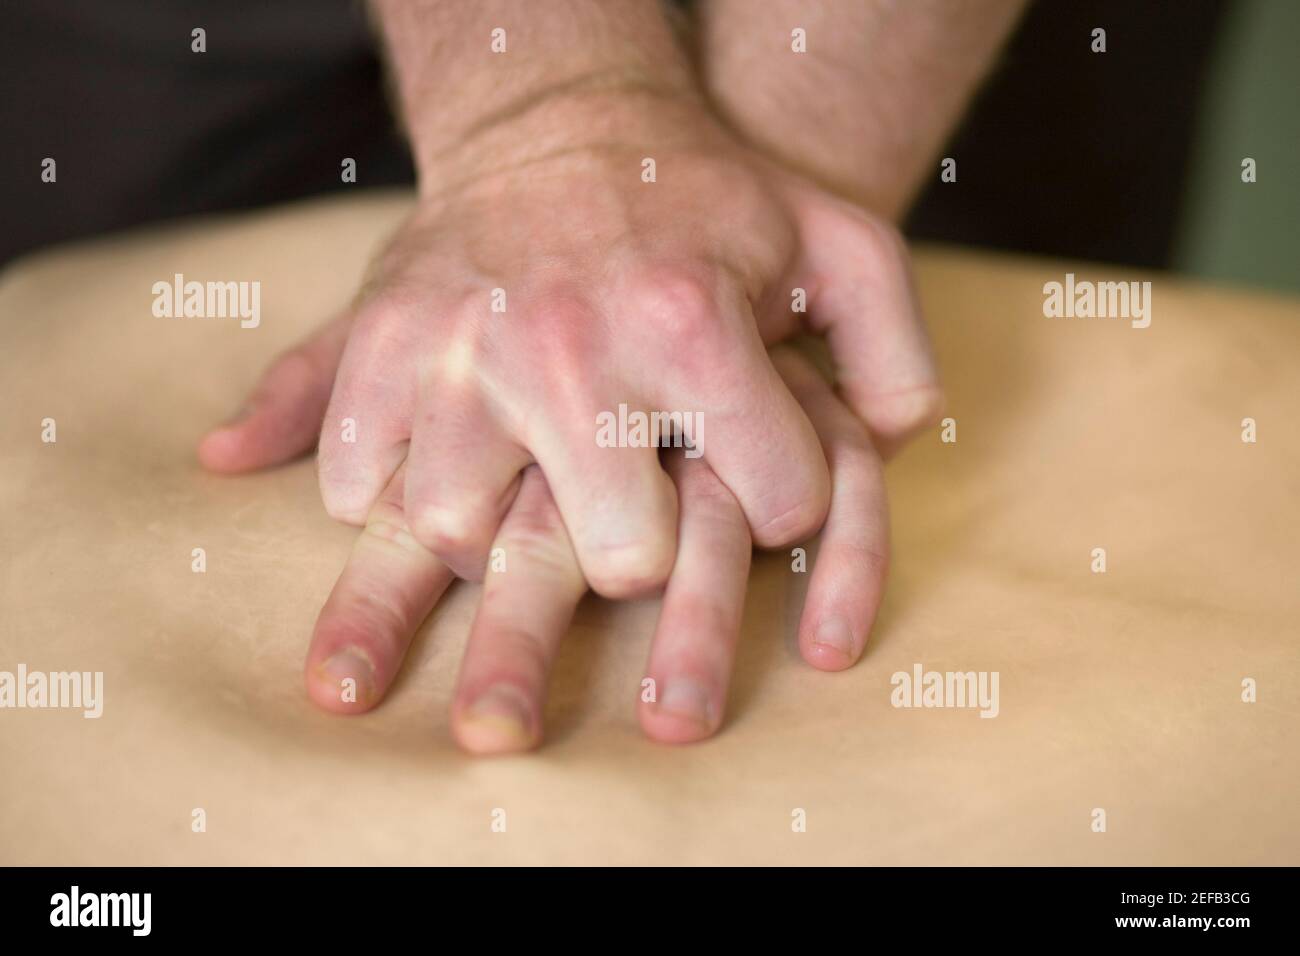 Medical students Leaning CPR Stock Photo